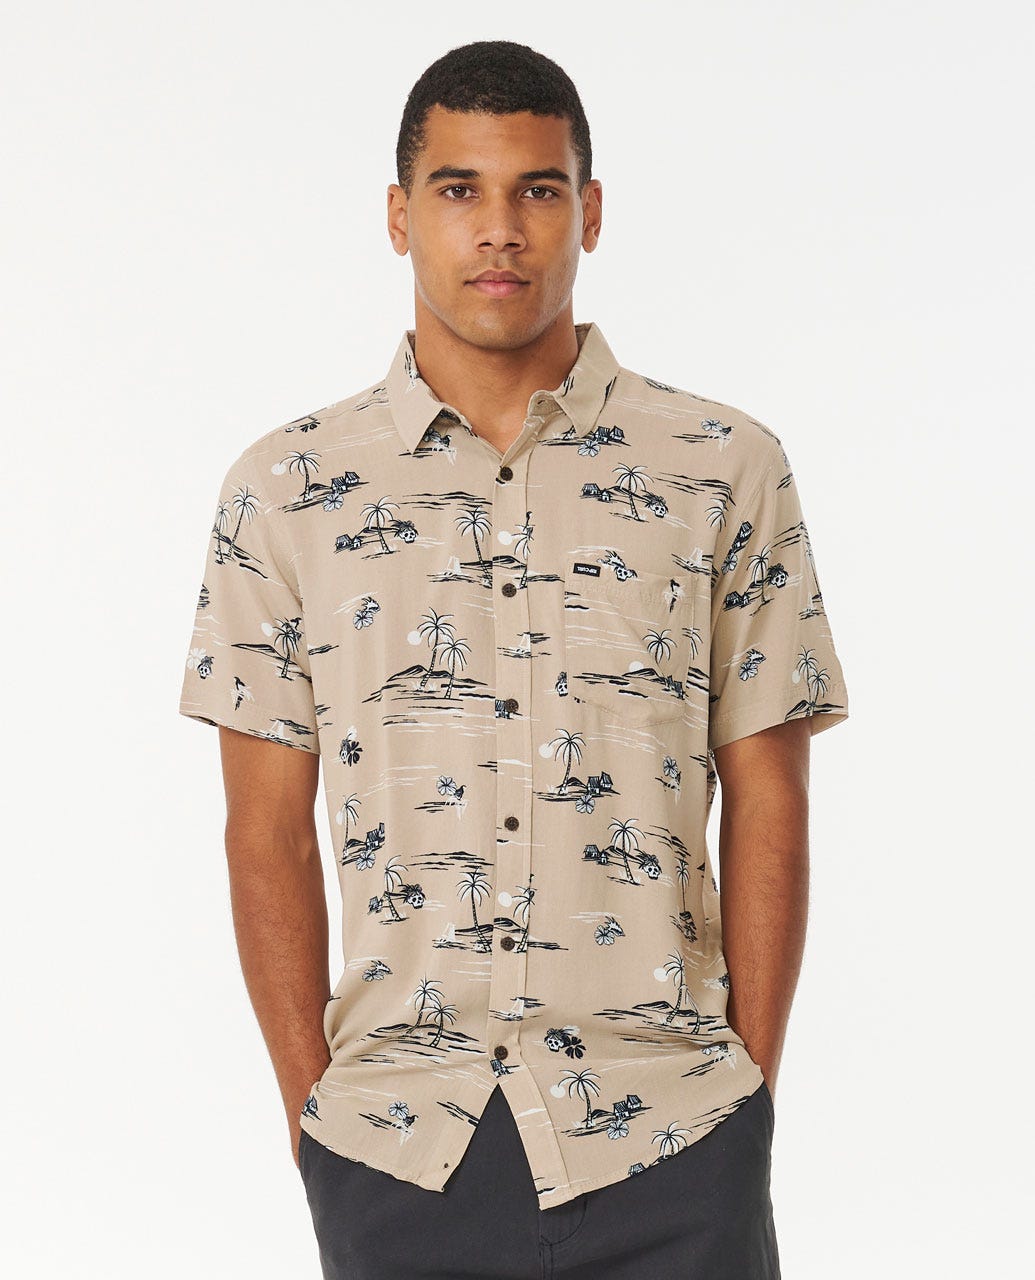 Rip Curl Party Pack Short Sleeve Shirt - Taupe - Sun Diego Boardshop